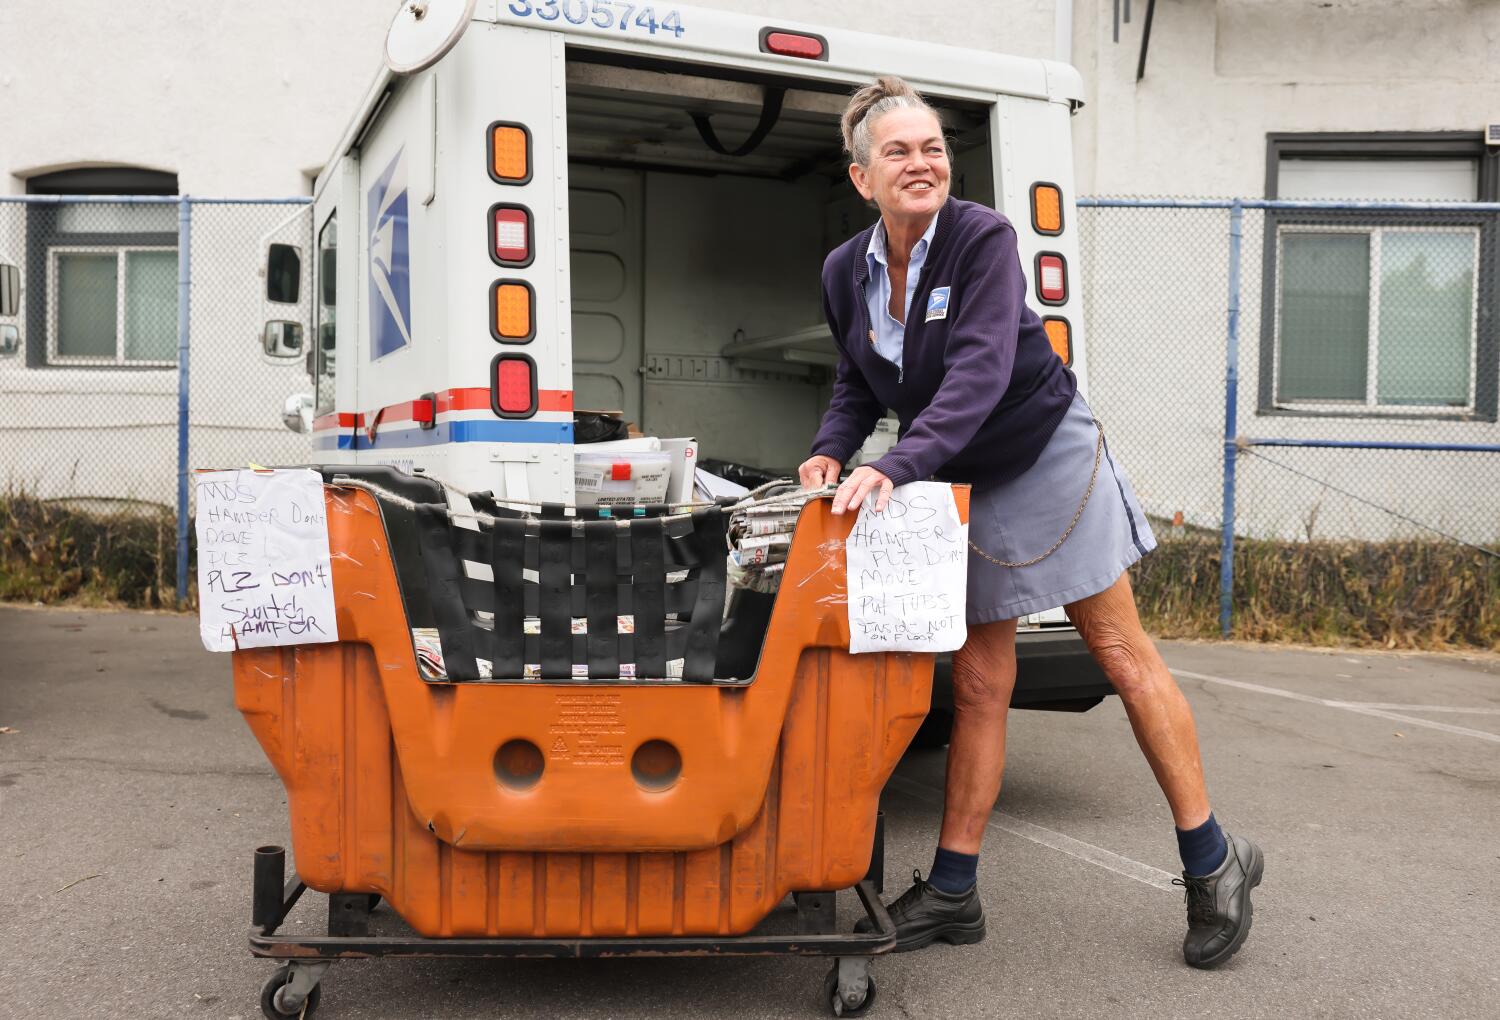 Ruff gig: L.A. mail carriers lead nation in dog bites